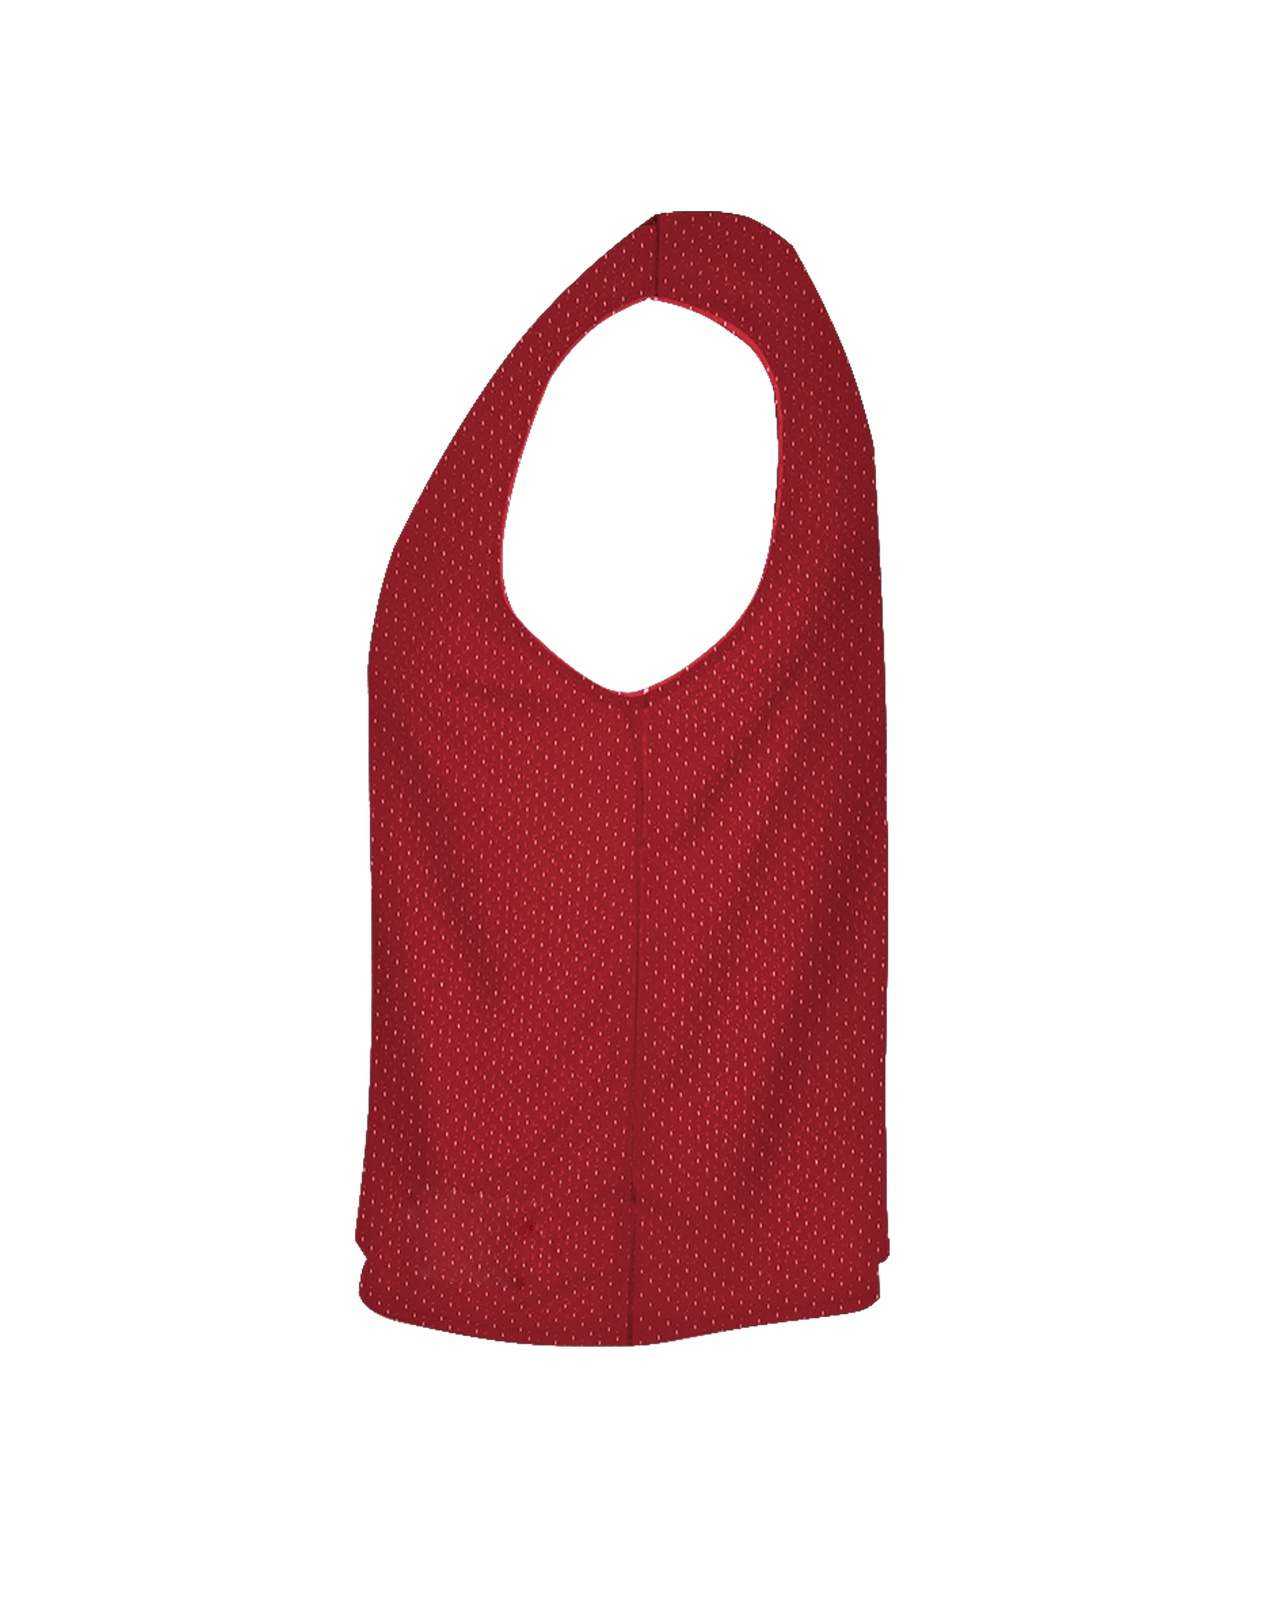 C2 Sport 5260 Mesh Reversible Youth Pinnie - Red White - HIT a Double - 1